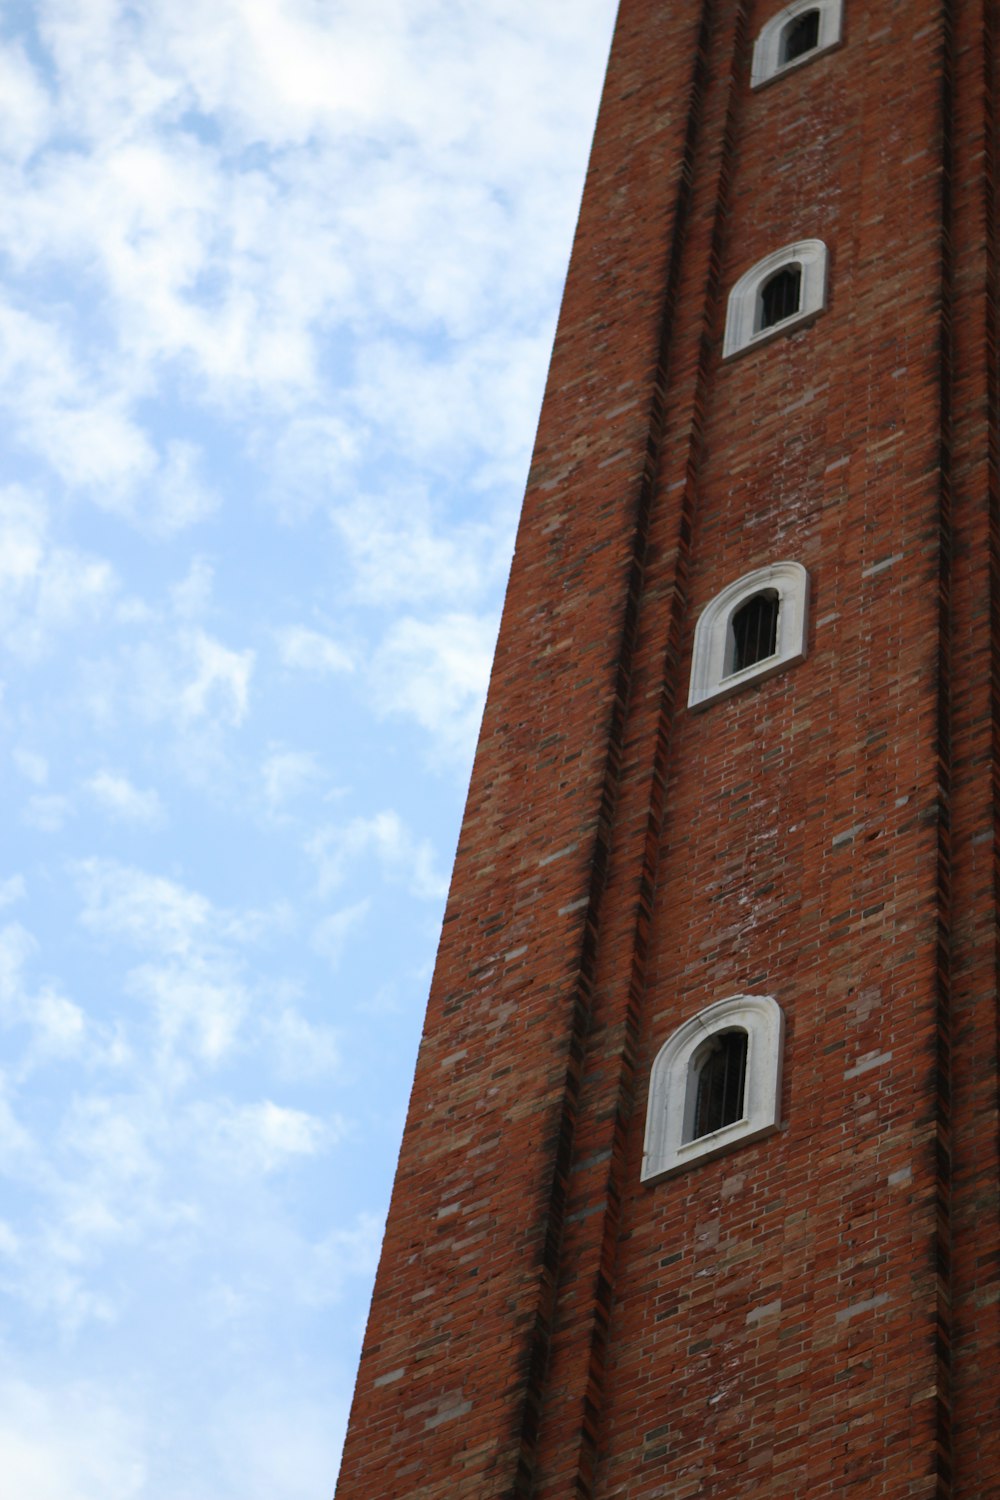 a tall brick tower with a clock on each of it's sides